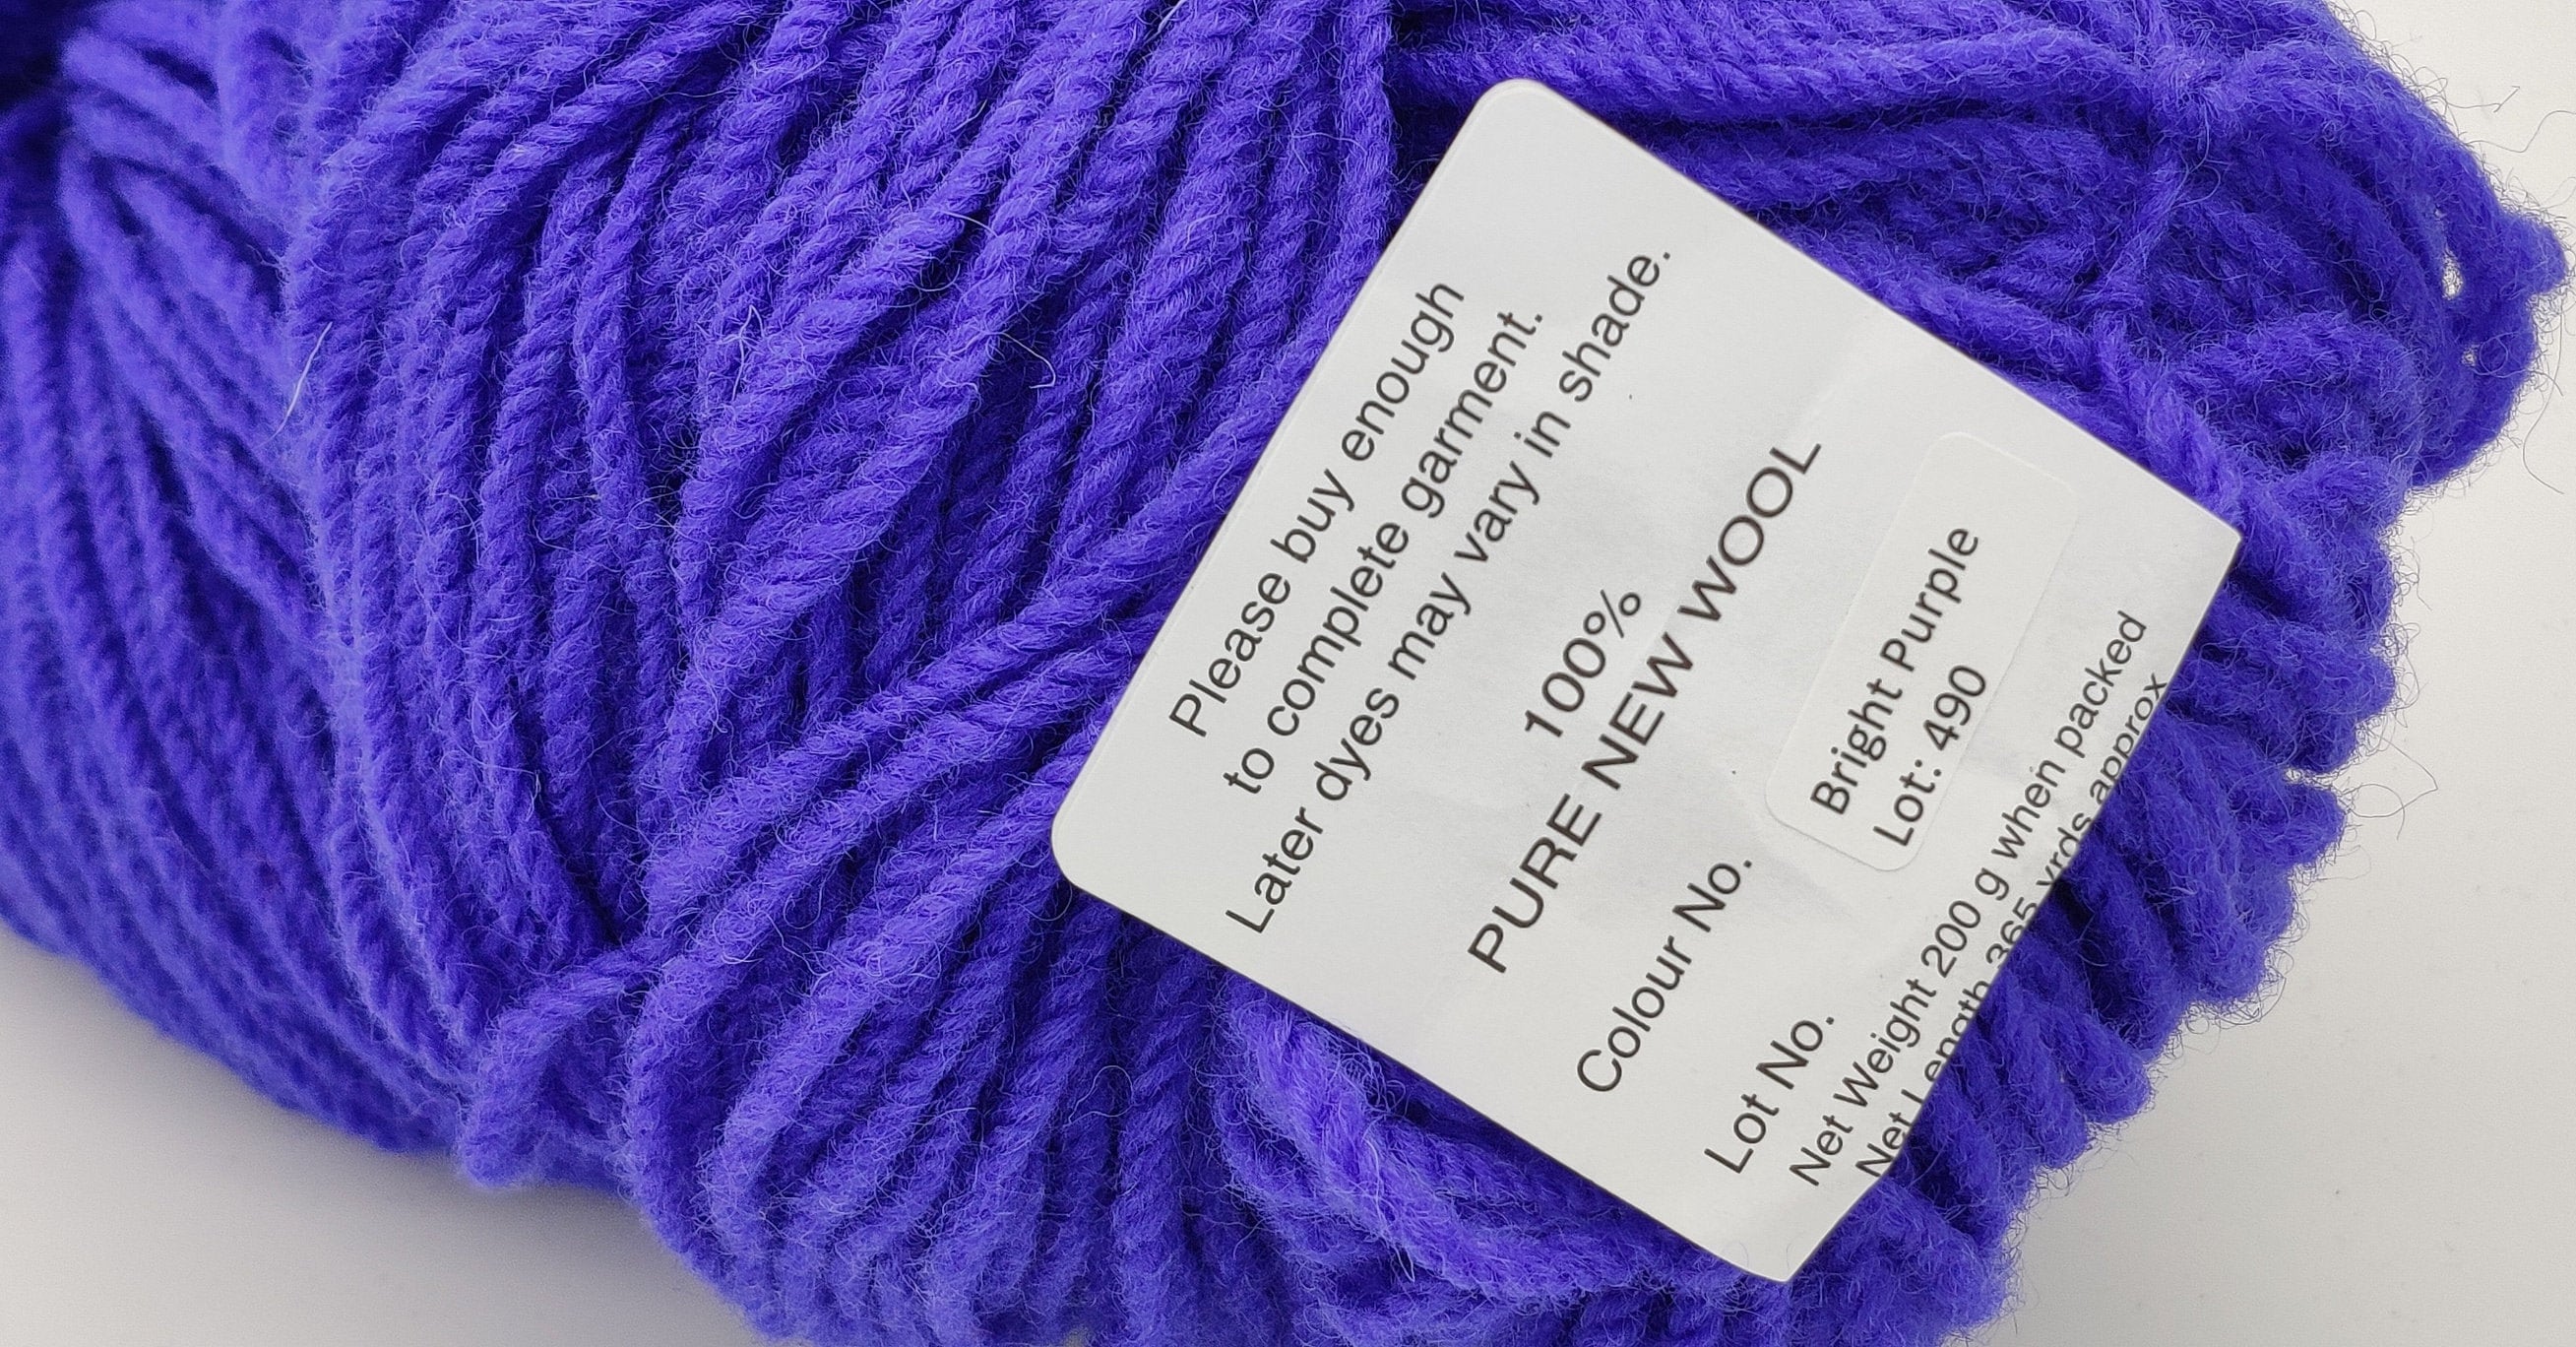 Authentic Aran Knitting Wool - bright purple - 200g/365yards - 100% pure  new wool - MADE IN IRELAND